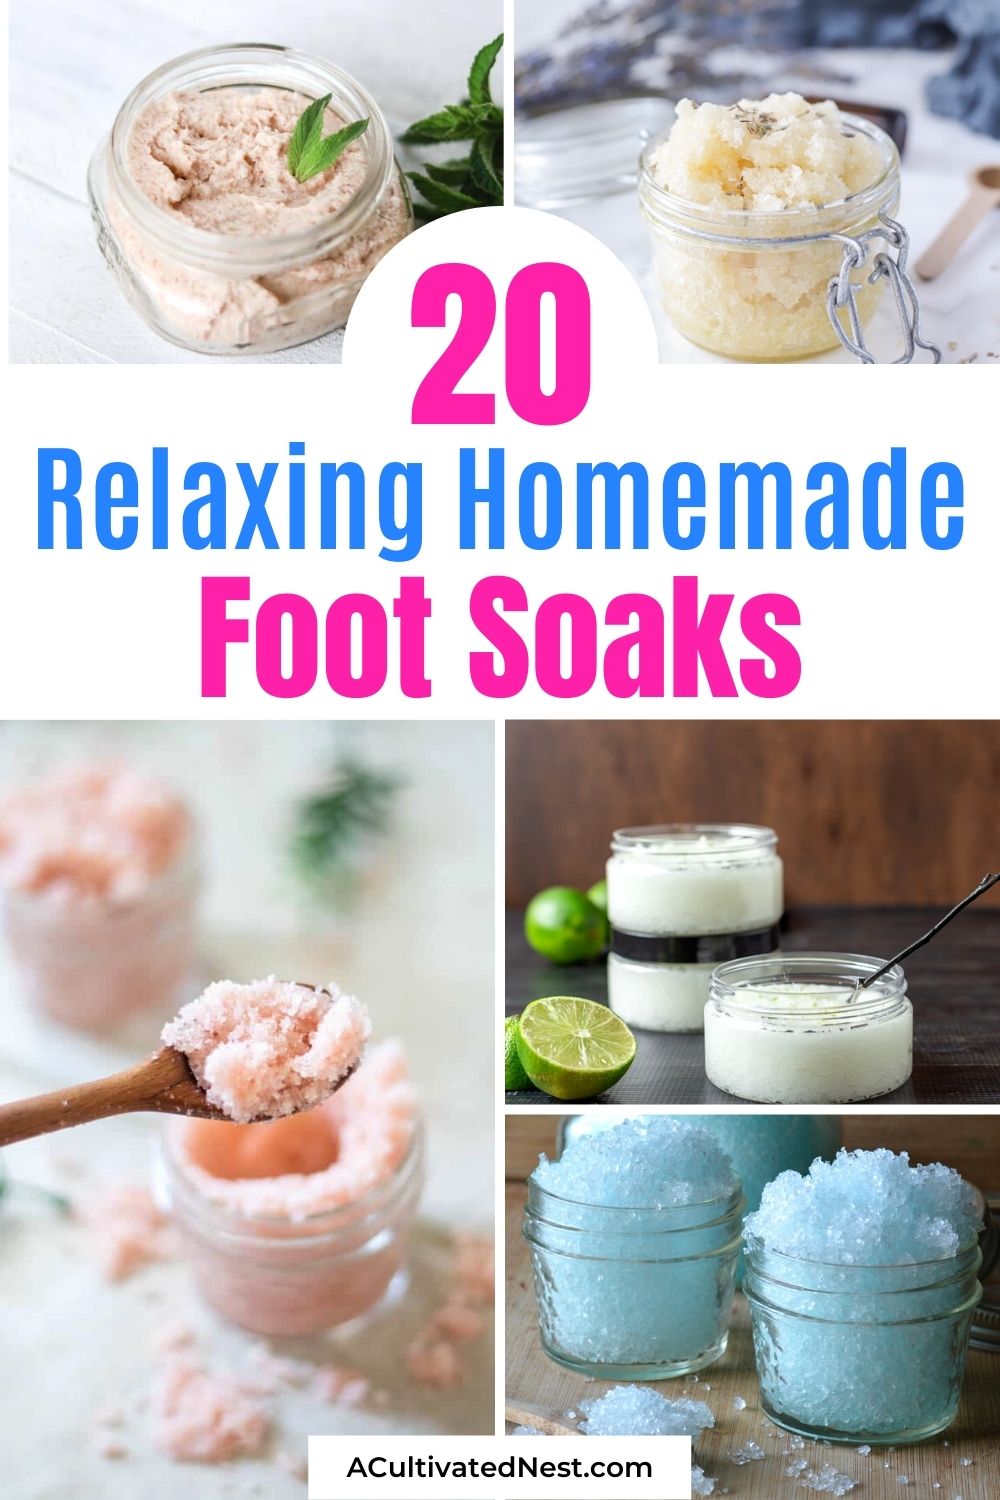 20 Relaxing Homemade Foot Soaks- An easy and inexpensive way to relax your tired feet after a long day is with these homemade foot soaks! These also make great DIY gifts! | #homemadeFootSoaks #diyFootSoak #diyGiftIdeas #homemadeGifts #ACultivatedNest